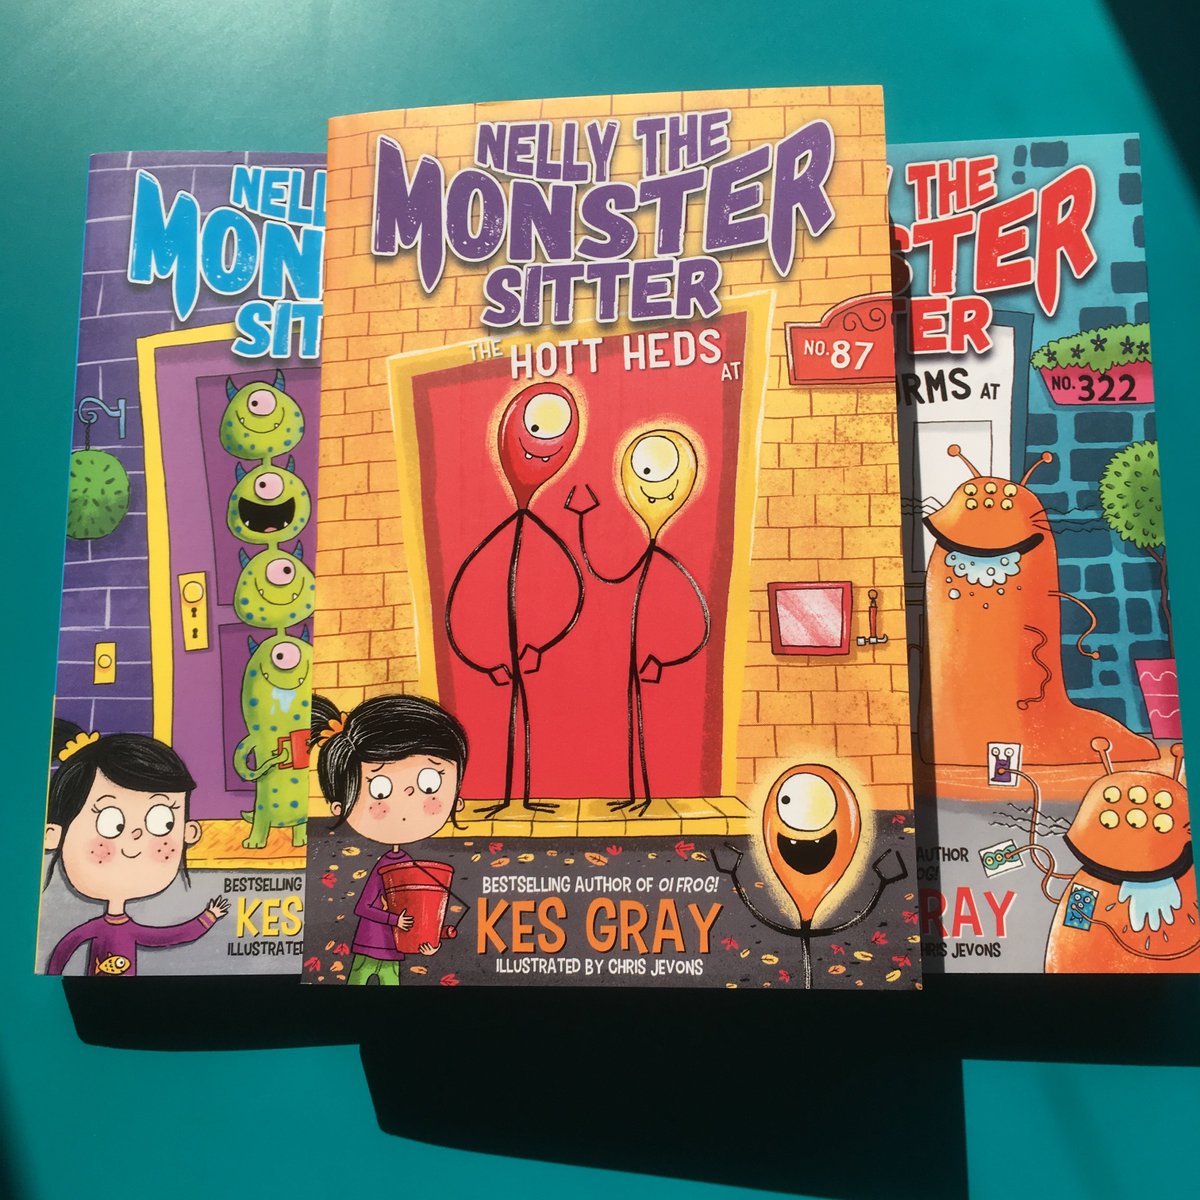 Over the last year, I’ve had the pleasure to illustrate a three book series written by #kesgray and published by the fab @hachettekids Here is the Nelly The Monster Sitter trilogy, expertly designed by @samuelperrett #brightreads #kidlit  #kidlitart #childrensbook #books